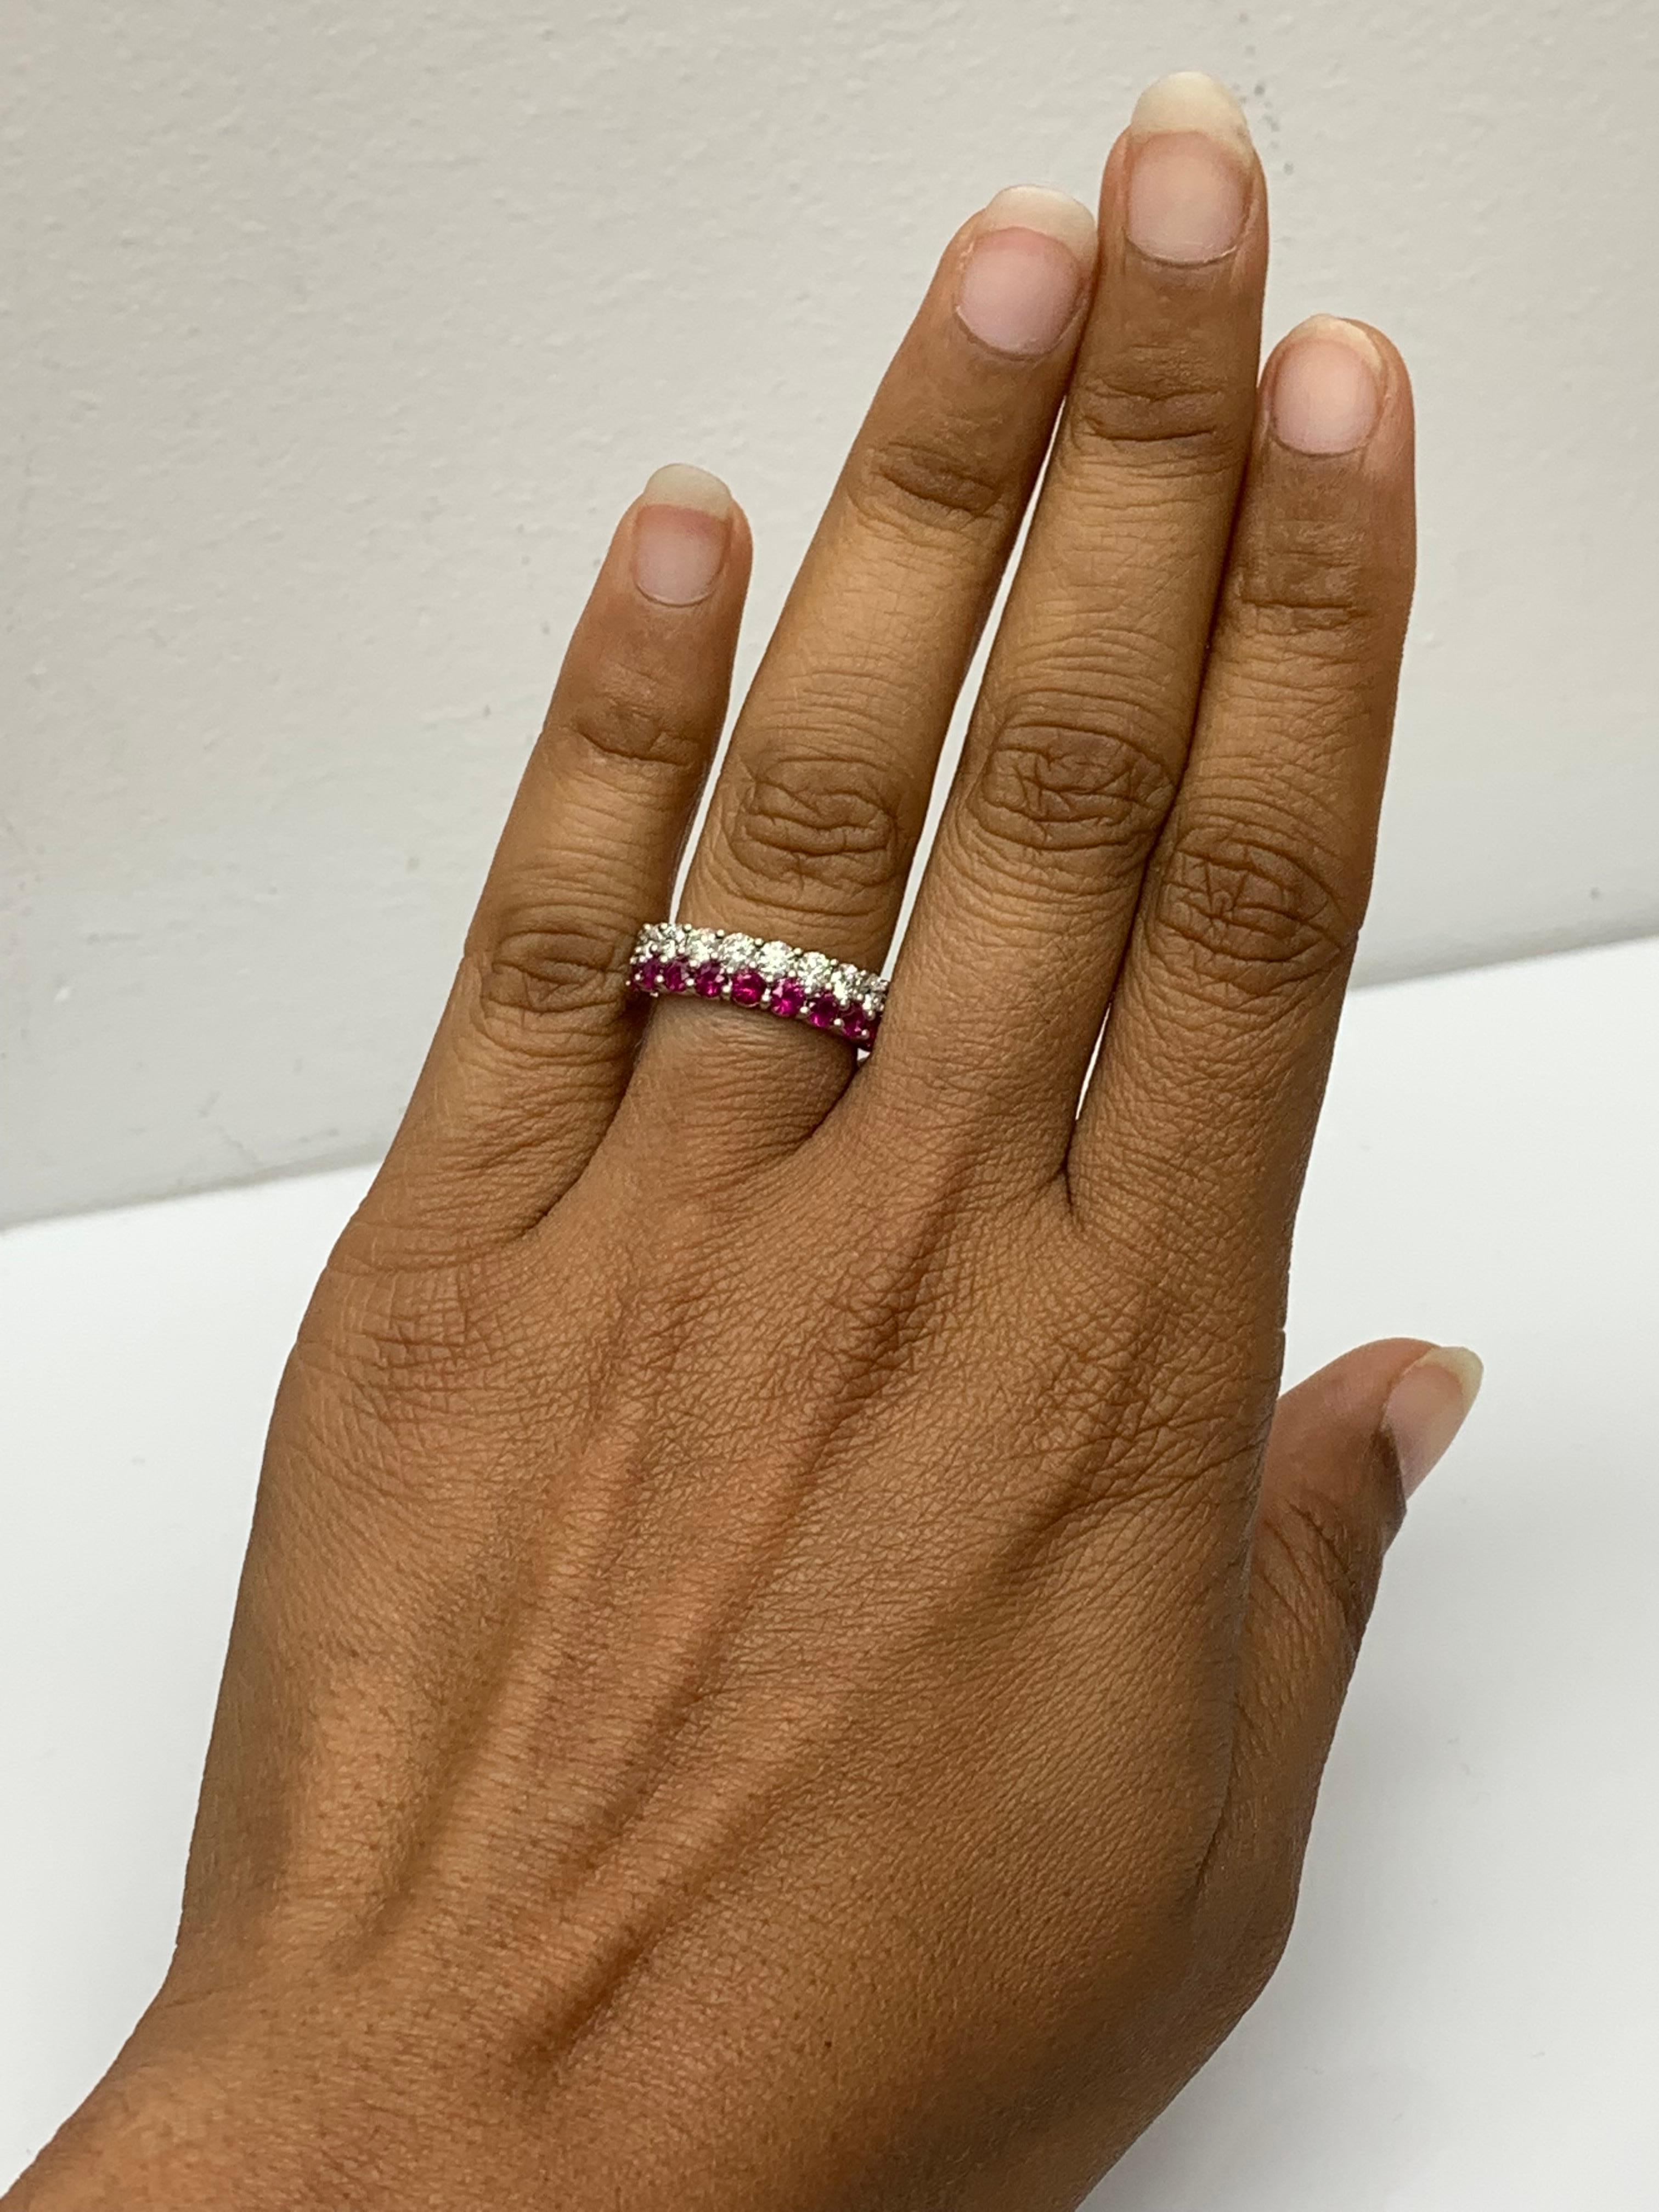 A unique and fashionable ring showcasing two rows of round-shape 10 rubies and 11 diamonds, set in a band design. Rubies weigh 1.07 carats and Diamonds weigh 1.01 carats in total. A brilliant and masterfully-made piece.

Style is available in